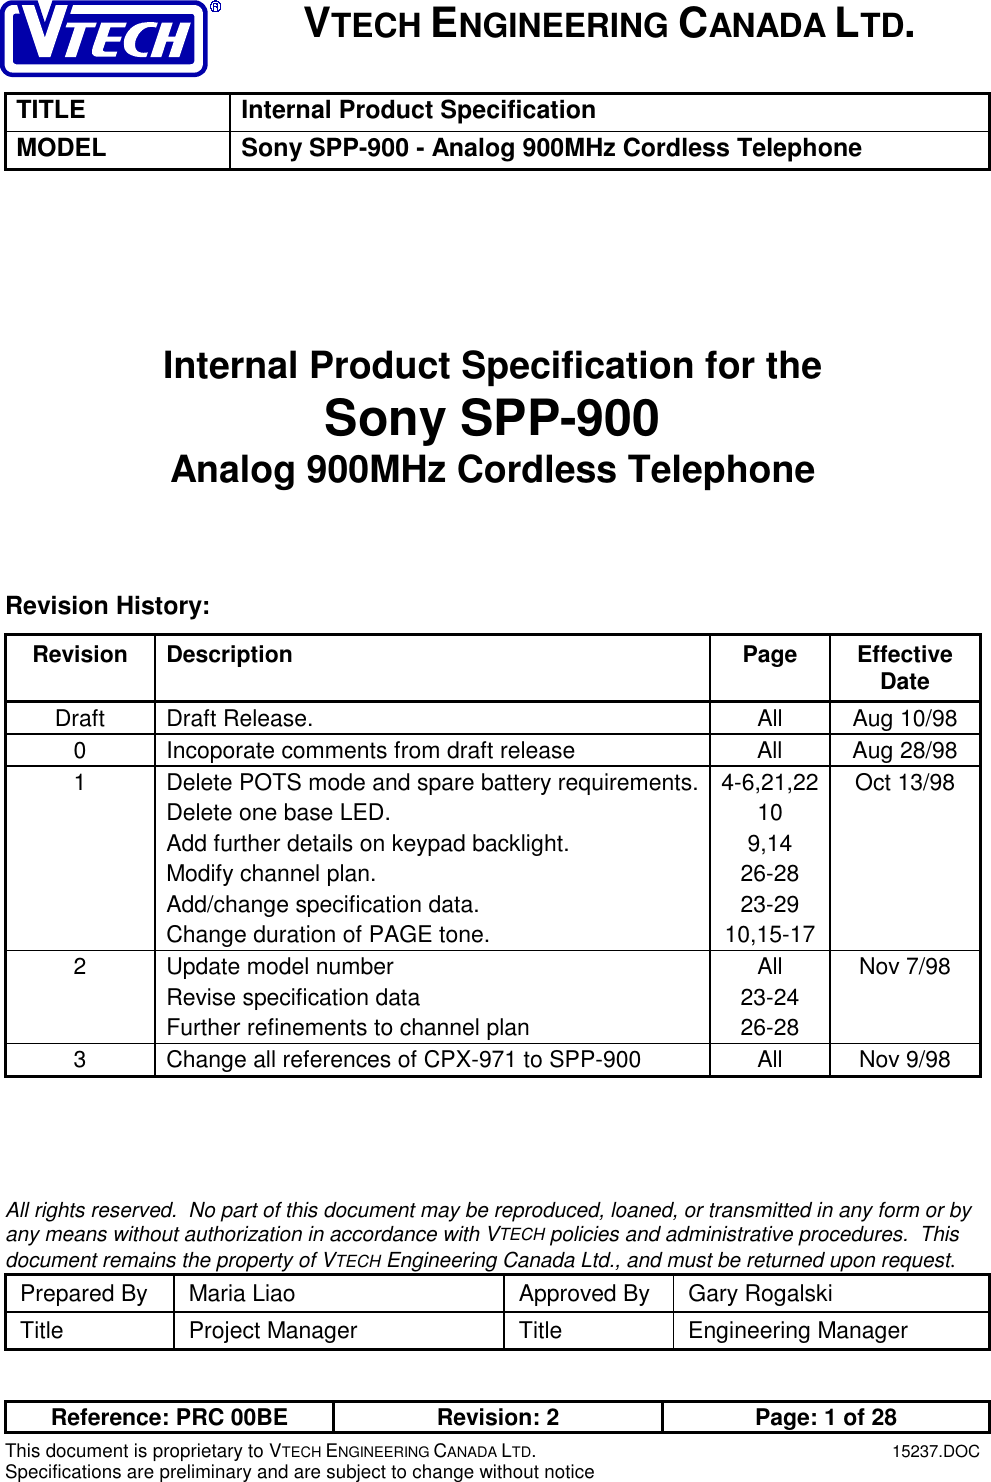 VTECH ENGINEERING CANADA LTD.TITLE Internal Product SpecificationMODEL Sony SPP-900 - Analog 900MHz Cordless TelephoneReference: PRC 00BE Revision: 2 Page: 1 of 28This document is proprietary to VTECH ENGINEERING CANADA LTD.15237.DOCSpecifications are preliminary and are subject to change without noticeInternal Product Specification for theSony SPP-900Analog 900MHz Cordless TelephoneRevision History:Revision Description Page EffectiveDateDraft Draft Release. All Aug 10/980 Incoporate comments from draft release All Aug 28/981 Delete POTS mode and spare battery requirements.Delete one base LED.Add further details on keypad backlight.Modify channel plan.Add/change specification data.Change duration of PAGE tone.4-6,21,22109,1426-2823-2910,15-17Oct 13/982 Update model numberRevise specification dataFurther refinements to channel planAll23-2426-28Nov 7/983 Change all references of CPX-971 to SPP-900 All Nov 9/98All rights reserved.  No part of this document may be reproduced, loaned, or transmitted in any form or byany means without authorization in accordance with VTECH policies and administrative procedures.  Thisdocument remains the property of VTECH Engineering Canada Ltd., and must be returned upon request.Prepared By Maria Liao Approved By Gary RogalskiTitle Project Manager Title Engineering Manager